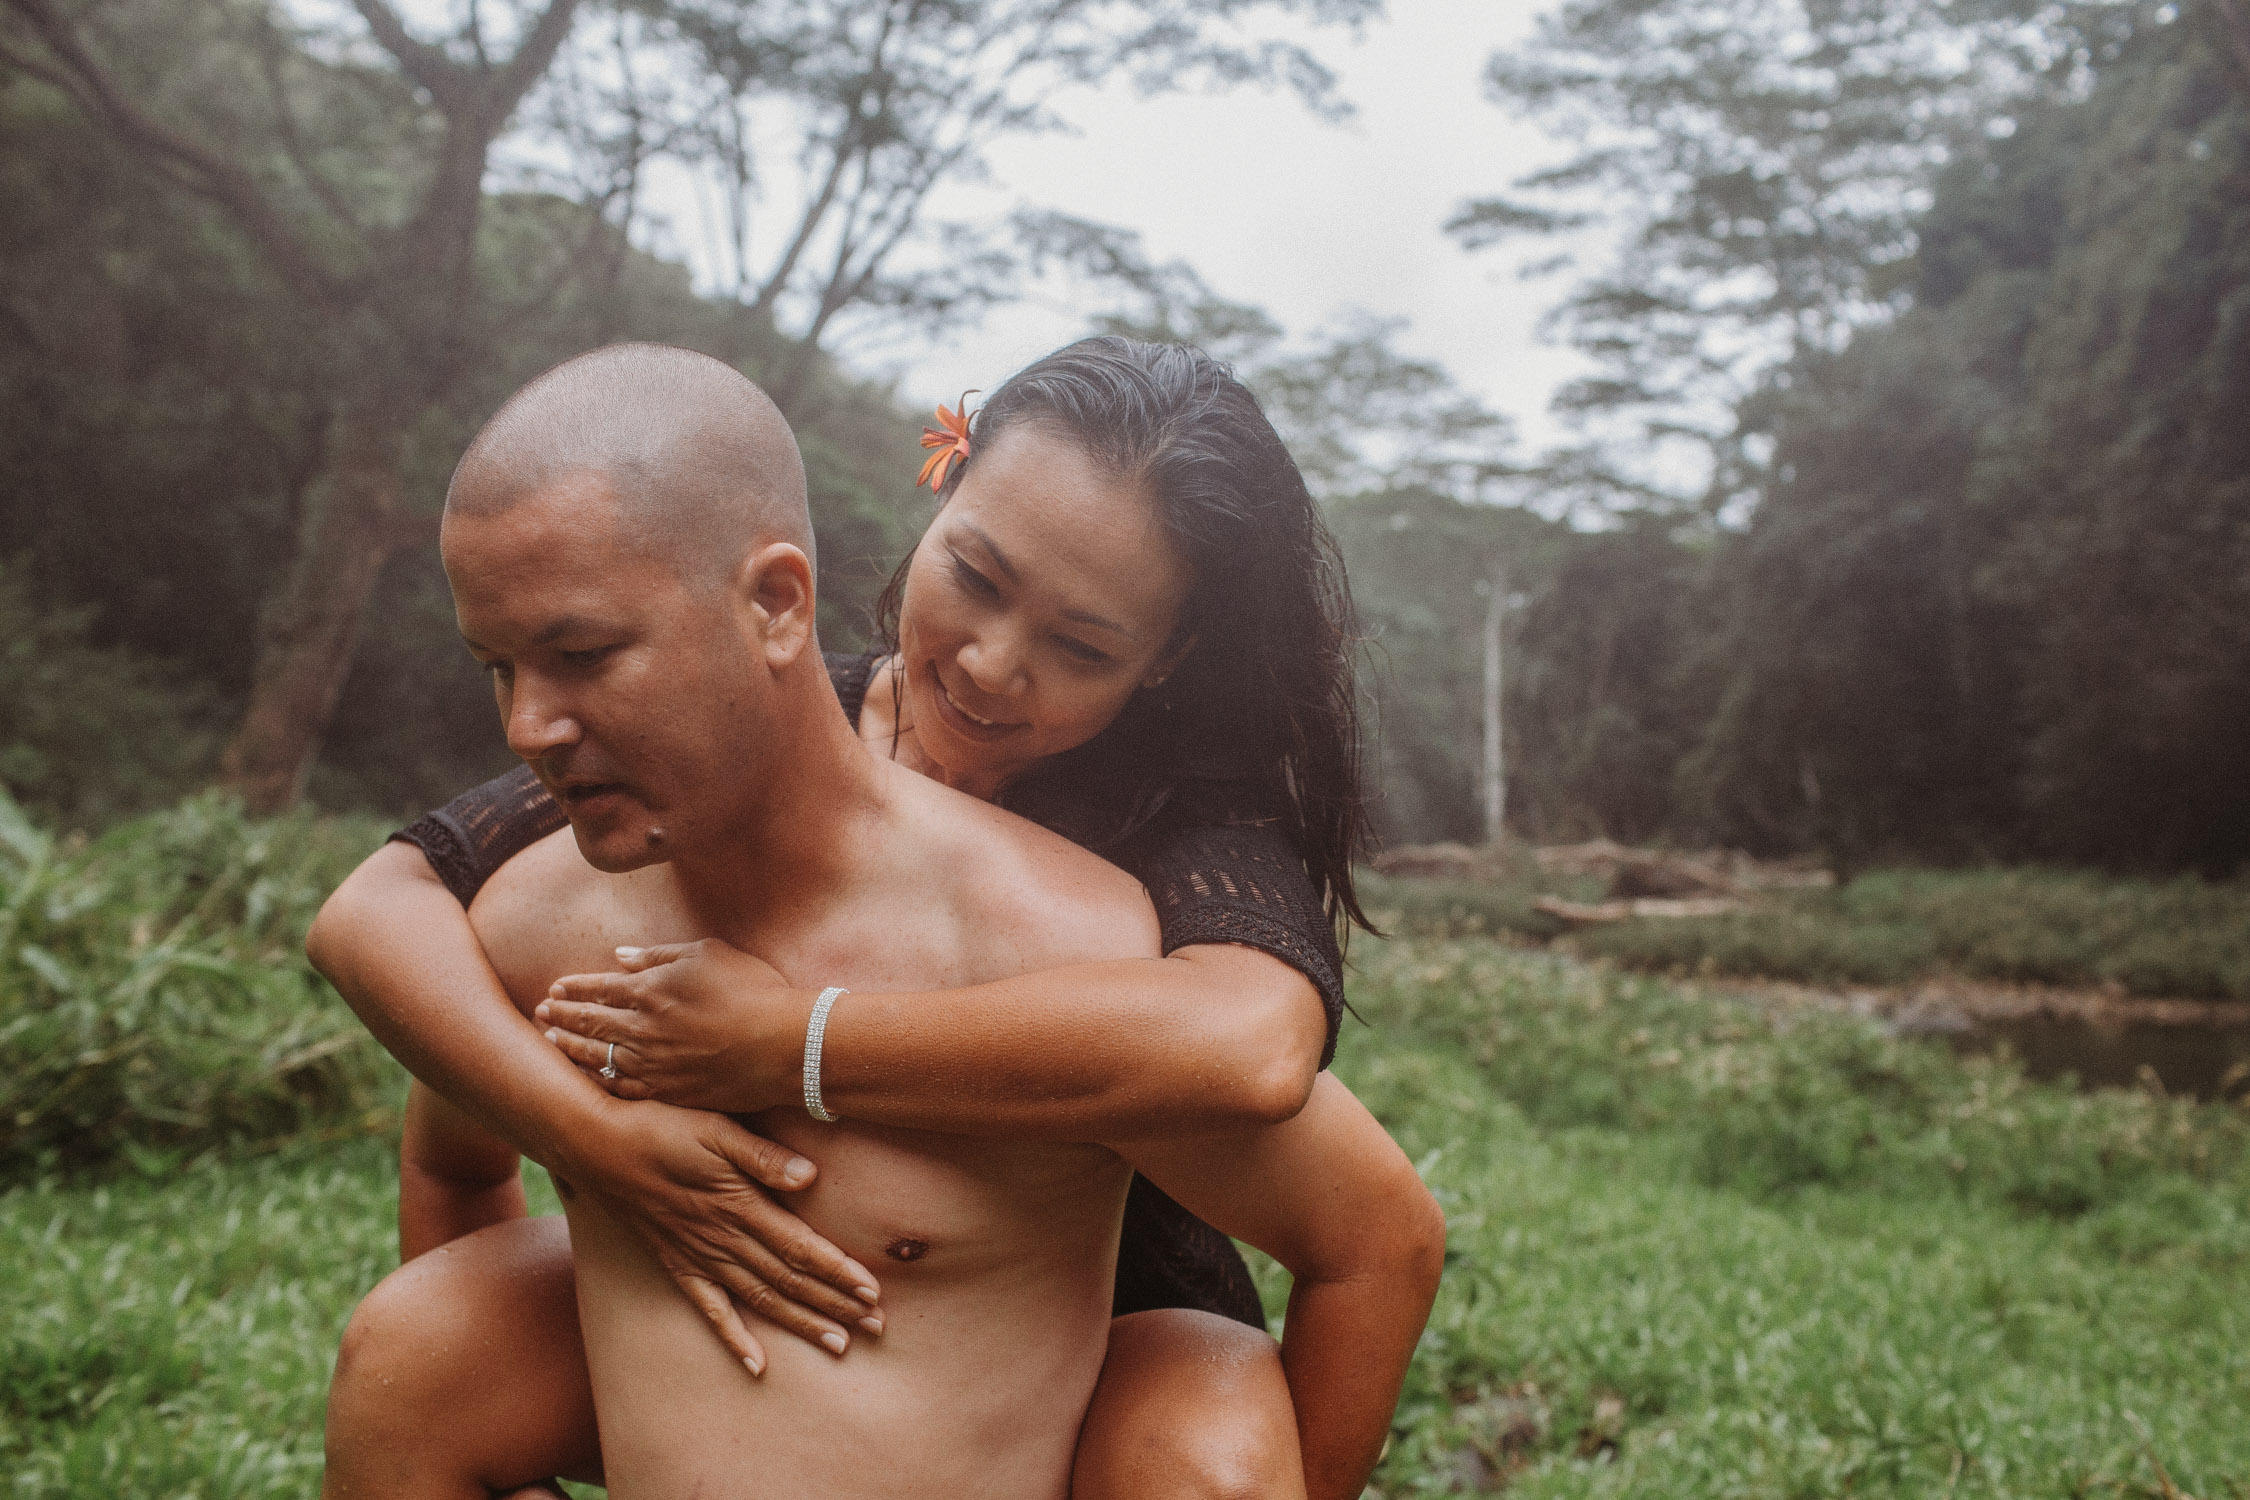 Man gives his fiance a piggyback ride in the rain during their Hawaii engagement photoshoot by Liz Koston.